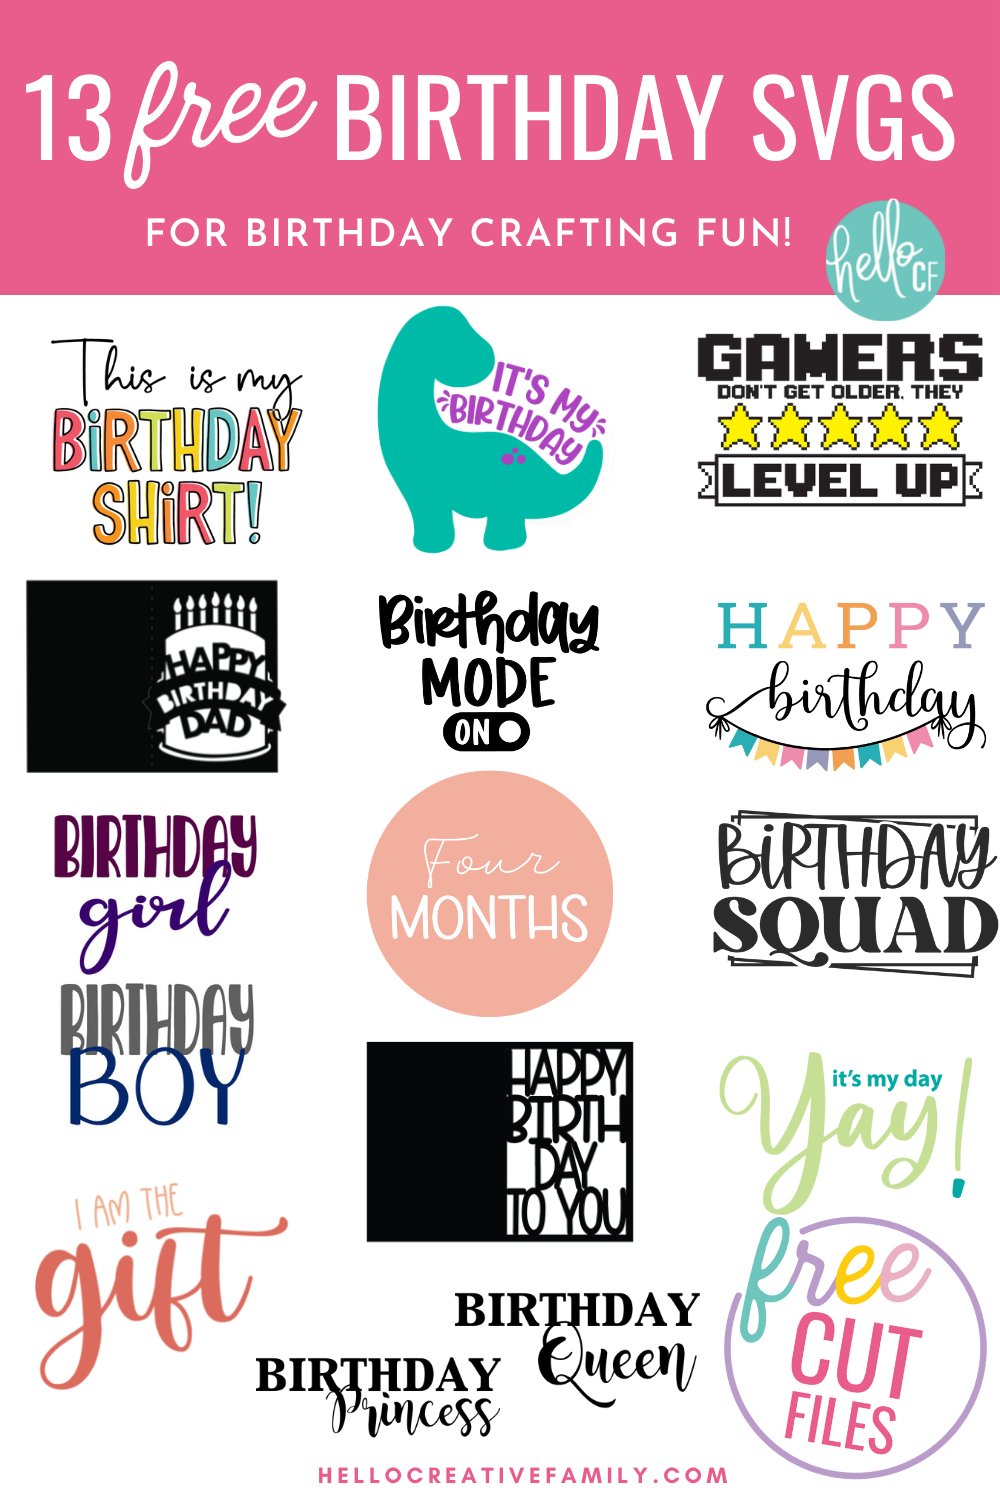 Celebrate a dinosaur loving kid's special day with this free birthday dinosaur SVG file! We've also got 13 free birthday SVG files for making DIY birthday shirts, birthday cards, birthday mugs, birthday party decorations and so much more using your Cricut Maker, Cricut Explore, Cricut Joy or Silhouette Cameo!